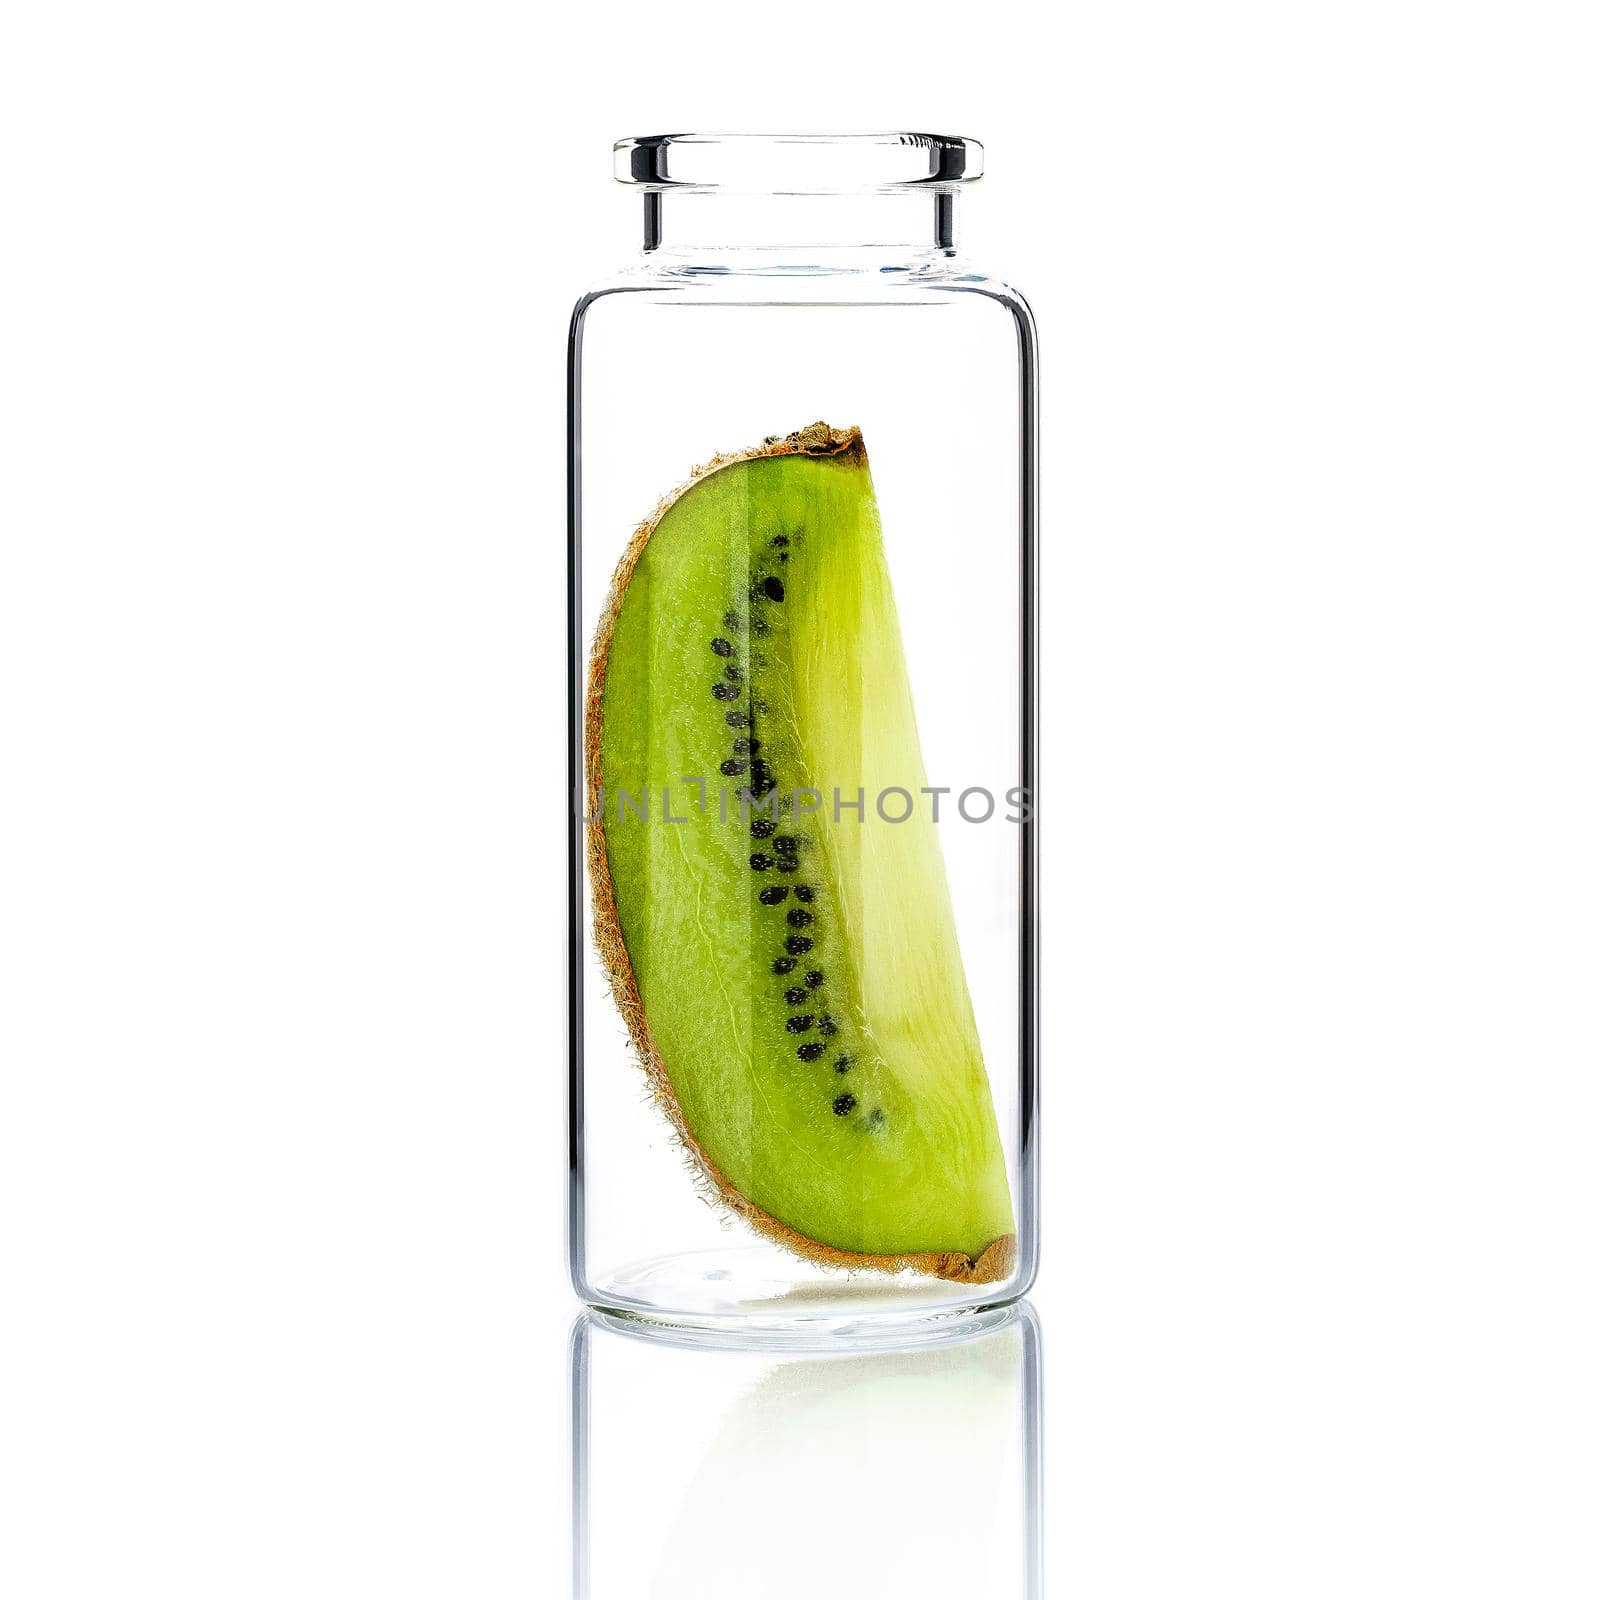  Homemade skin care with kiwi  slice in  glass bottle  isolated on white background. by kerdkanno